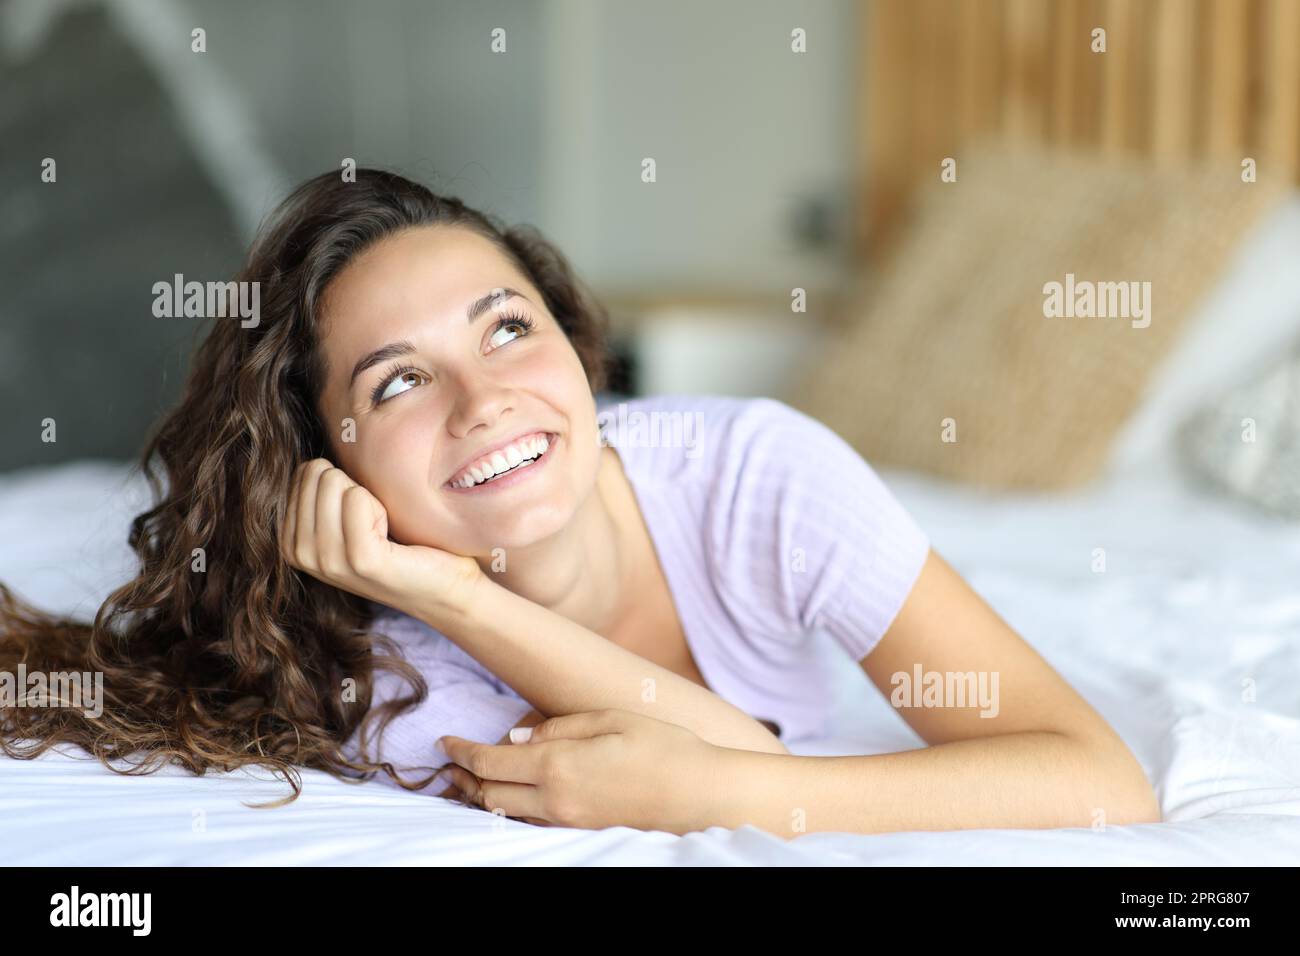 Happy woman looking at side on the bed Stock Photo